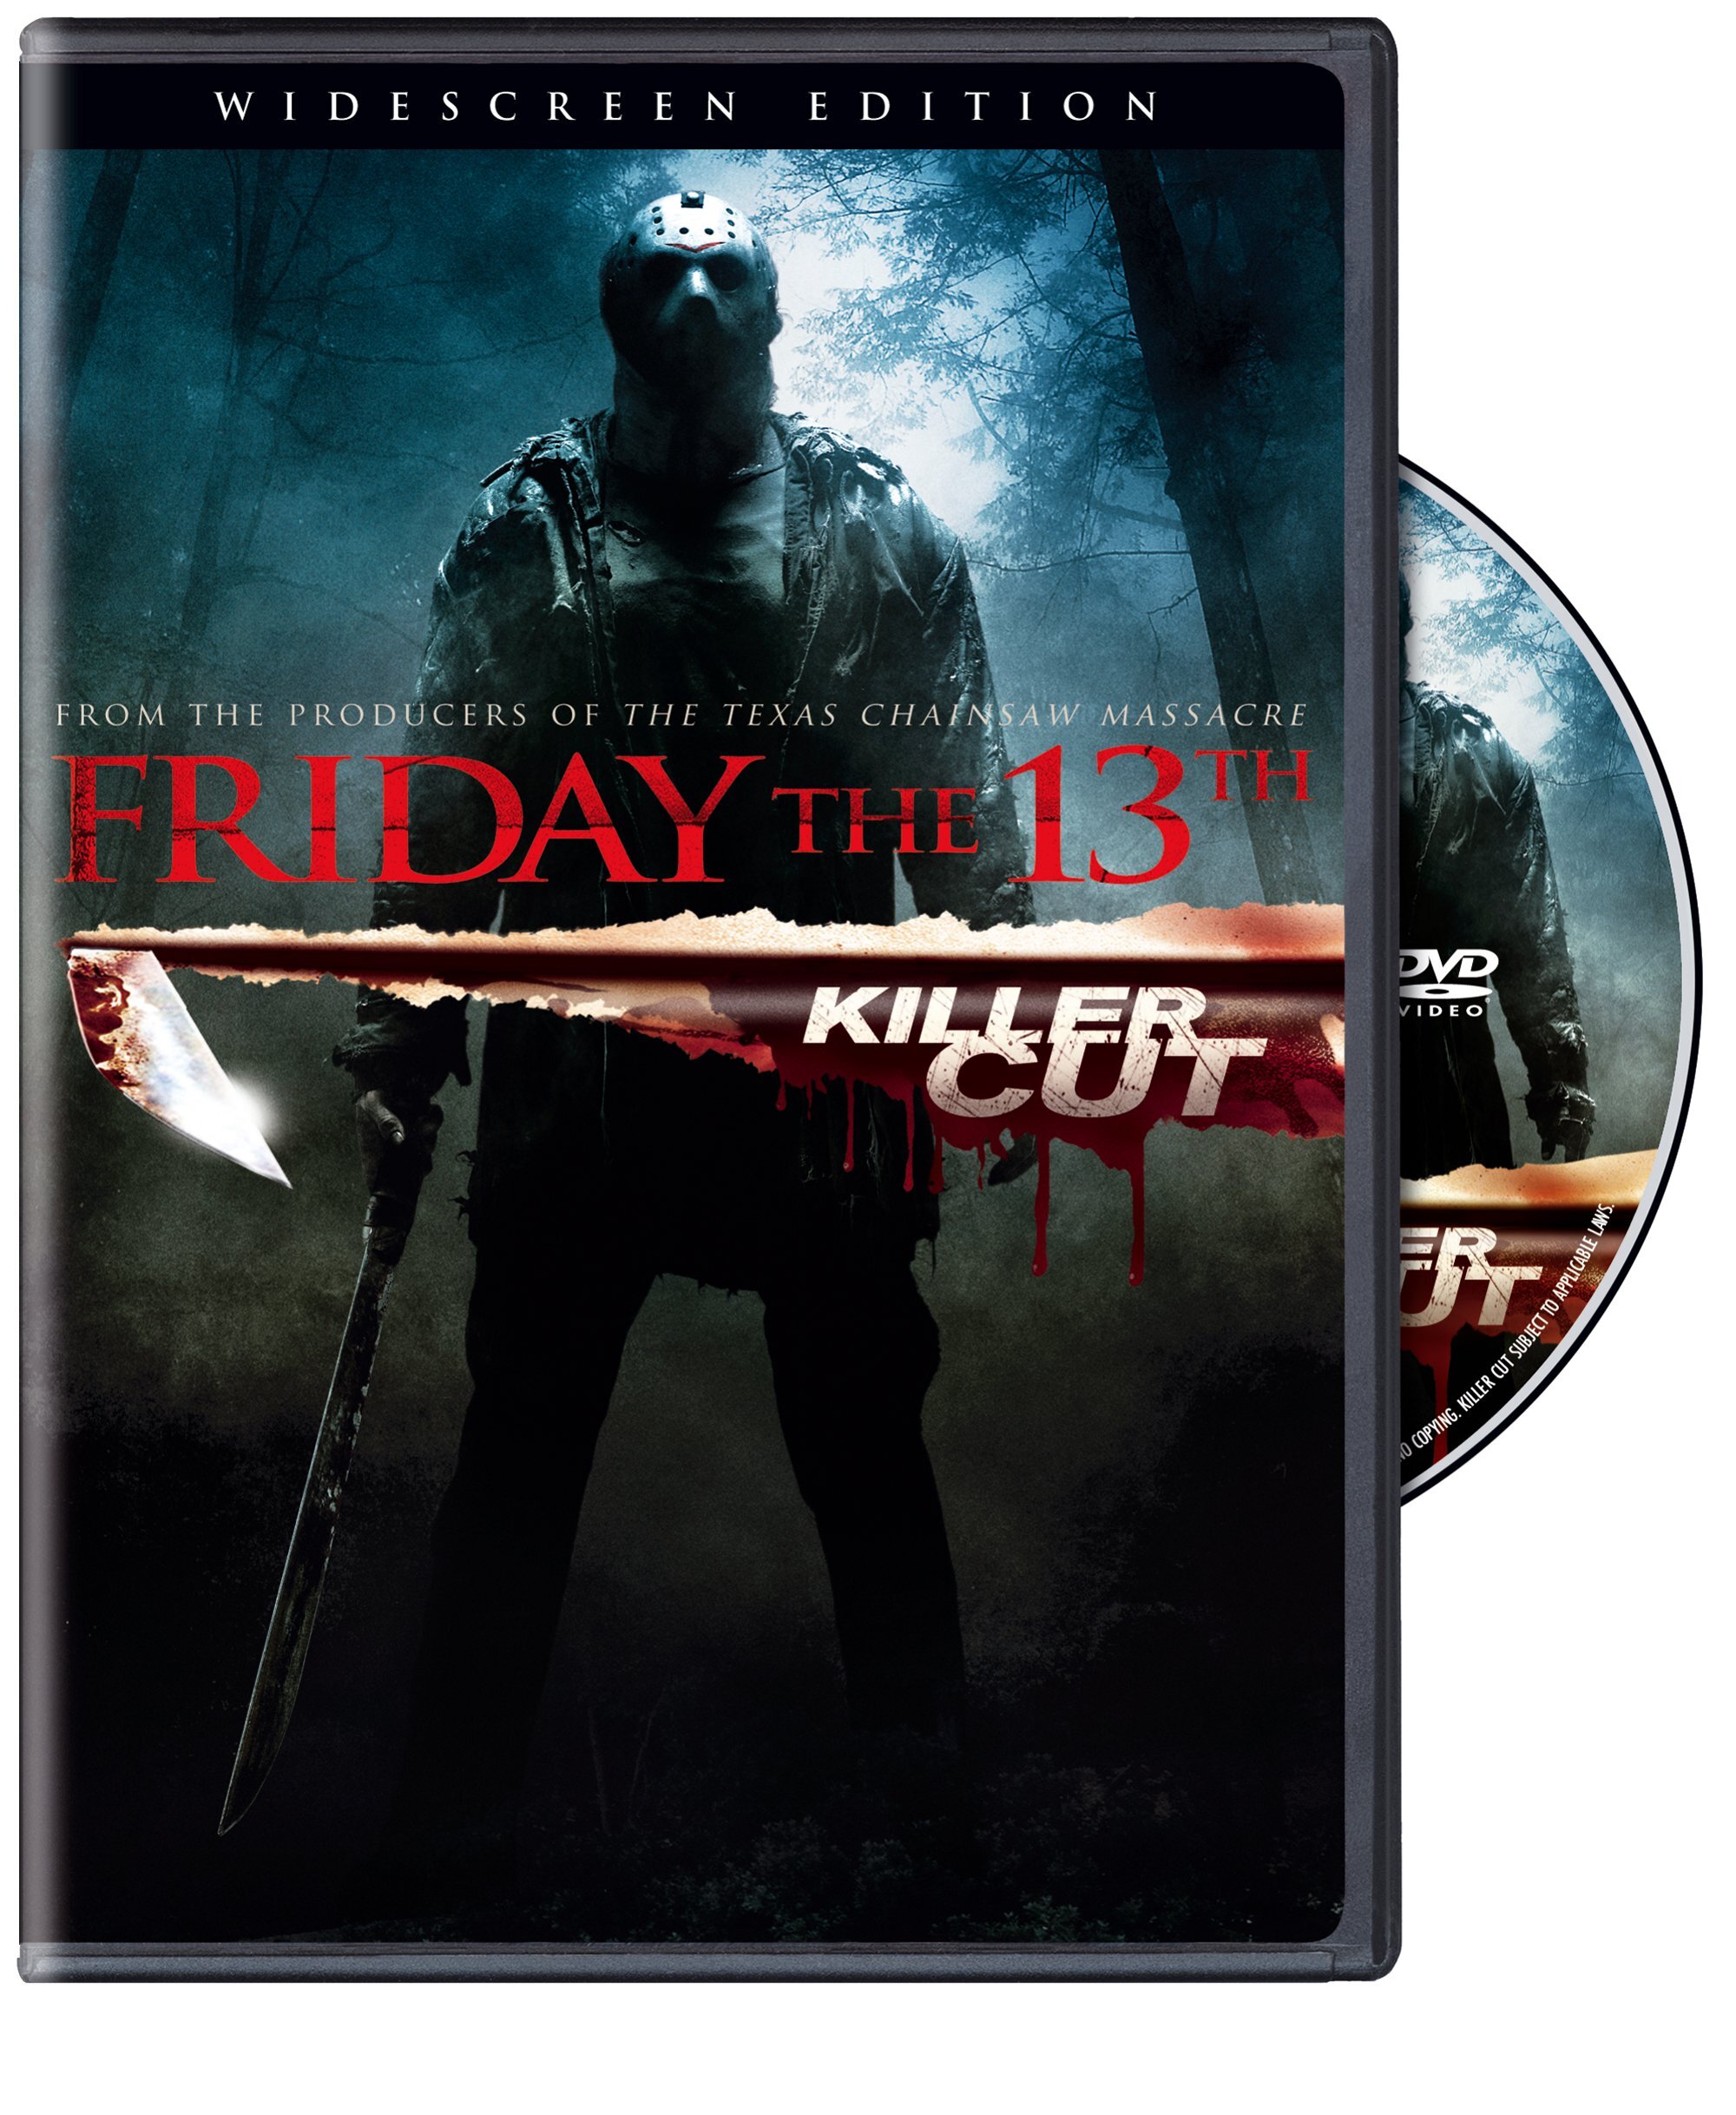 Buy Friday the 13th: Extended CutDVD Killer Cut DVD | GRUV